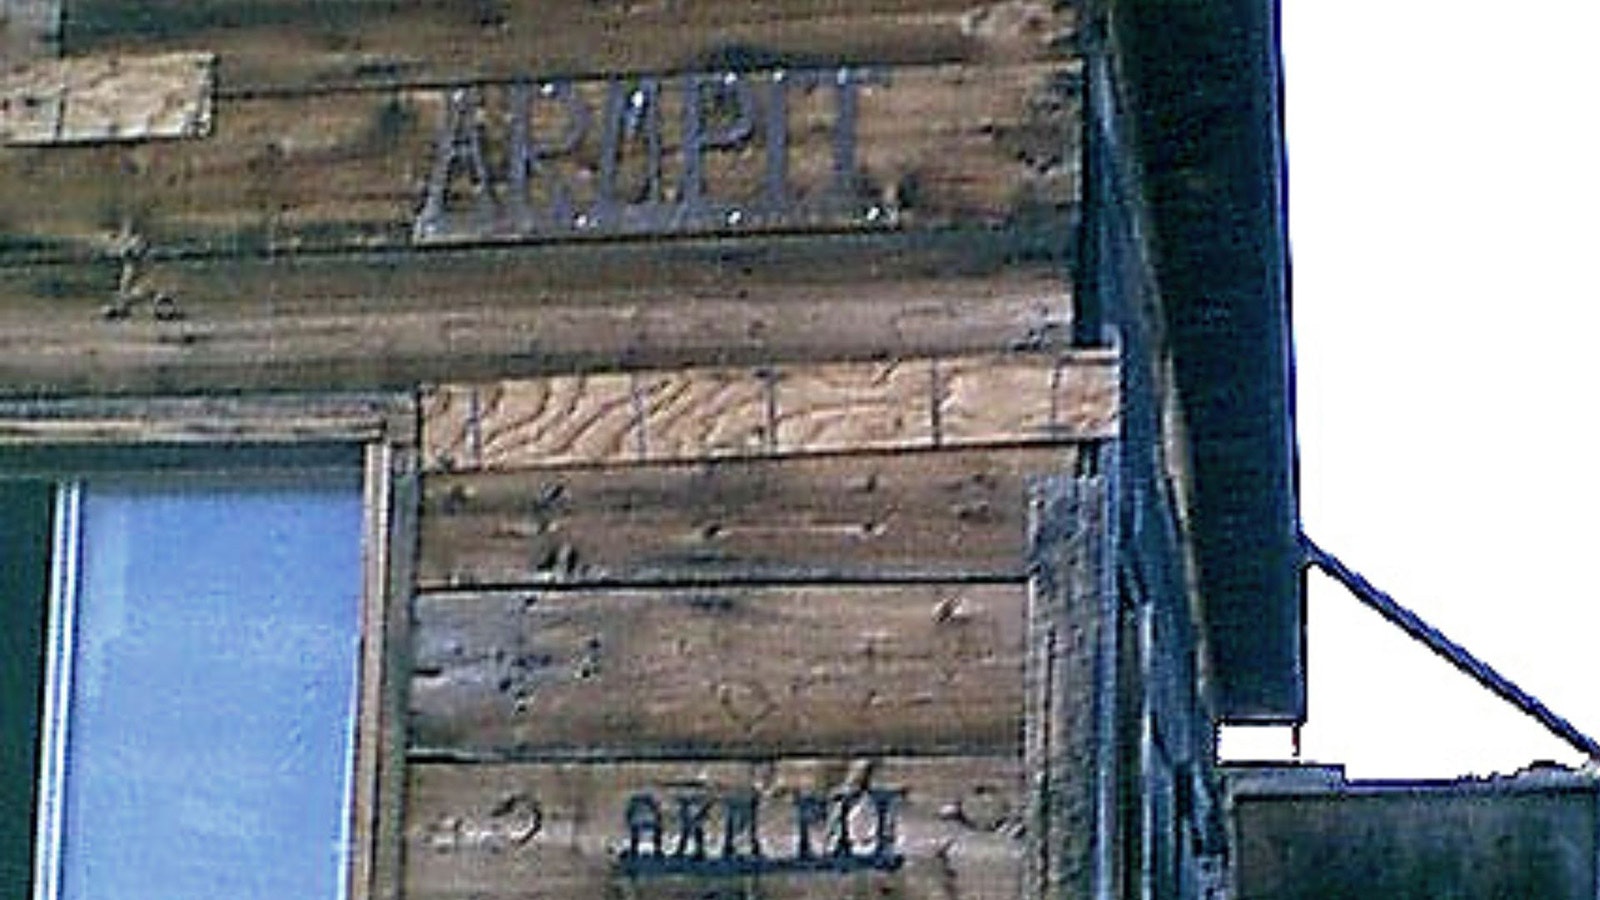 A simple cabin sign designates the official Armpit, Wyoming.